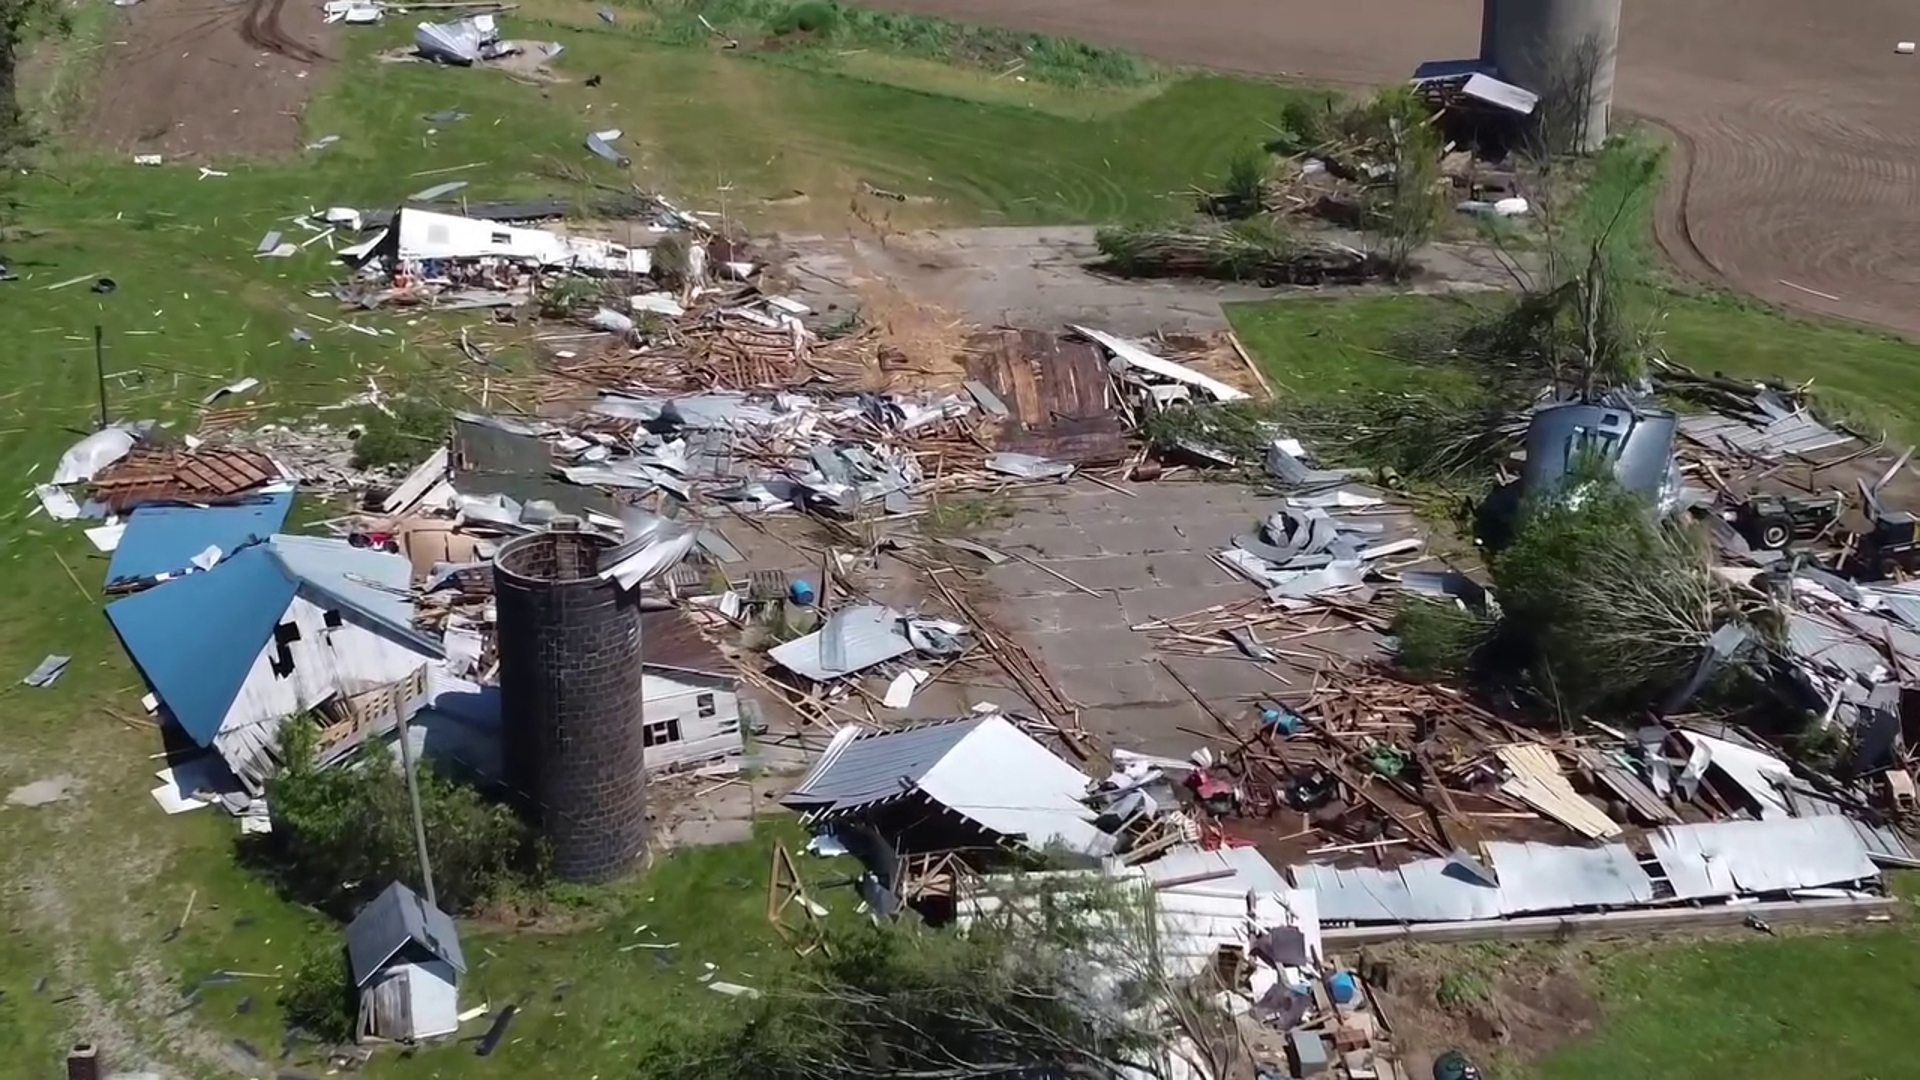 Drone video shows a farm destroyed just outside of Sherwood in Branch County, Michigan. Credit: Village of Union City